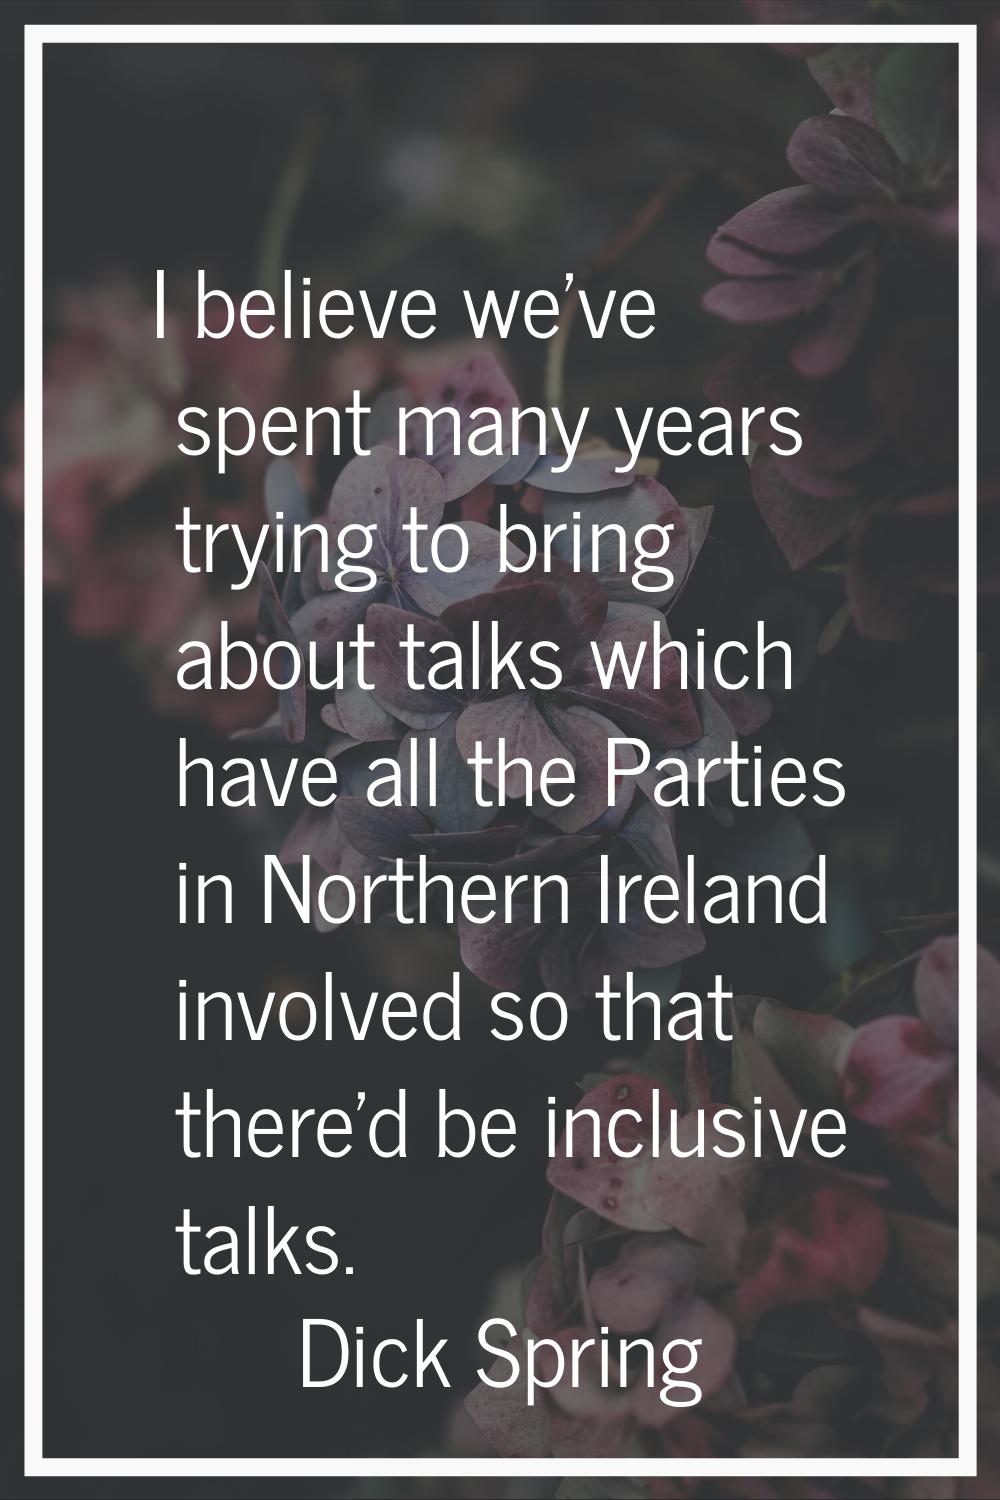 I believe we've spent many years trying to bring about talks which have all the Parties in Northern